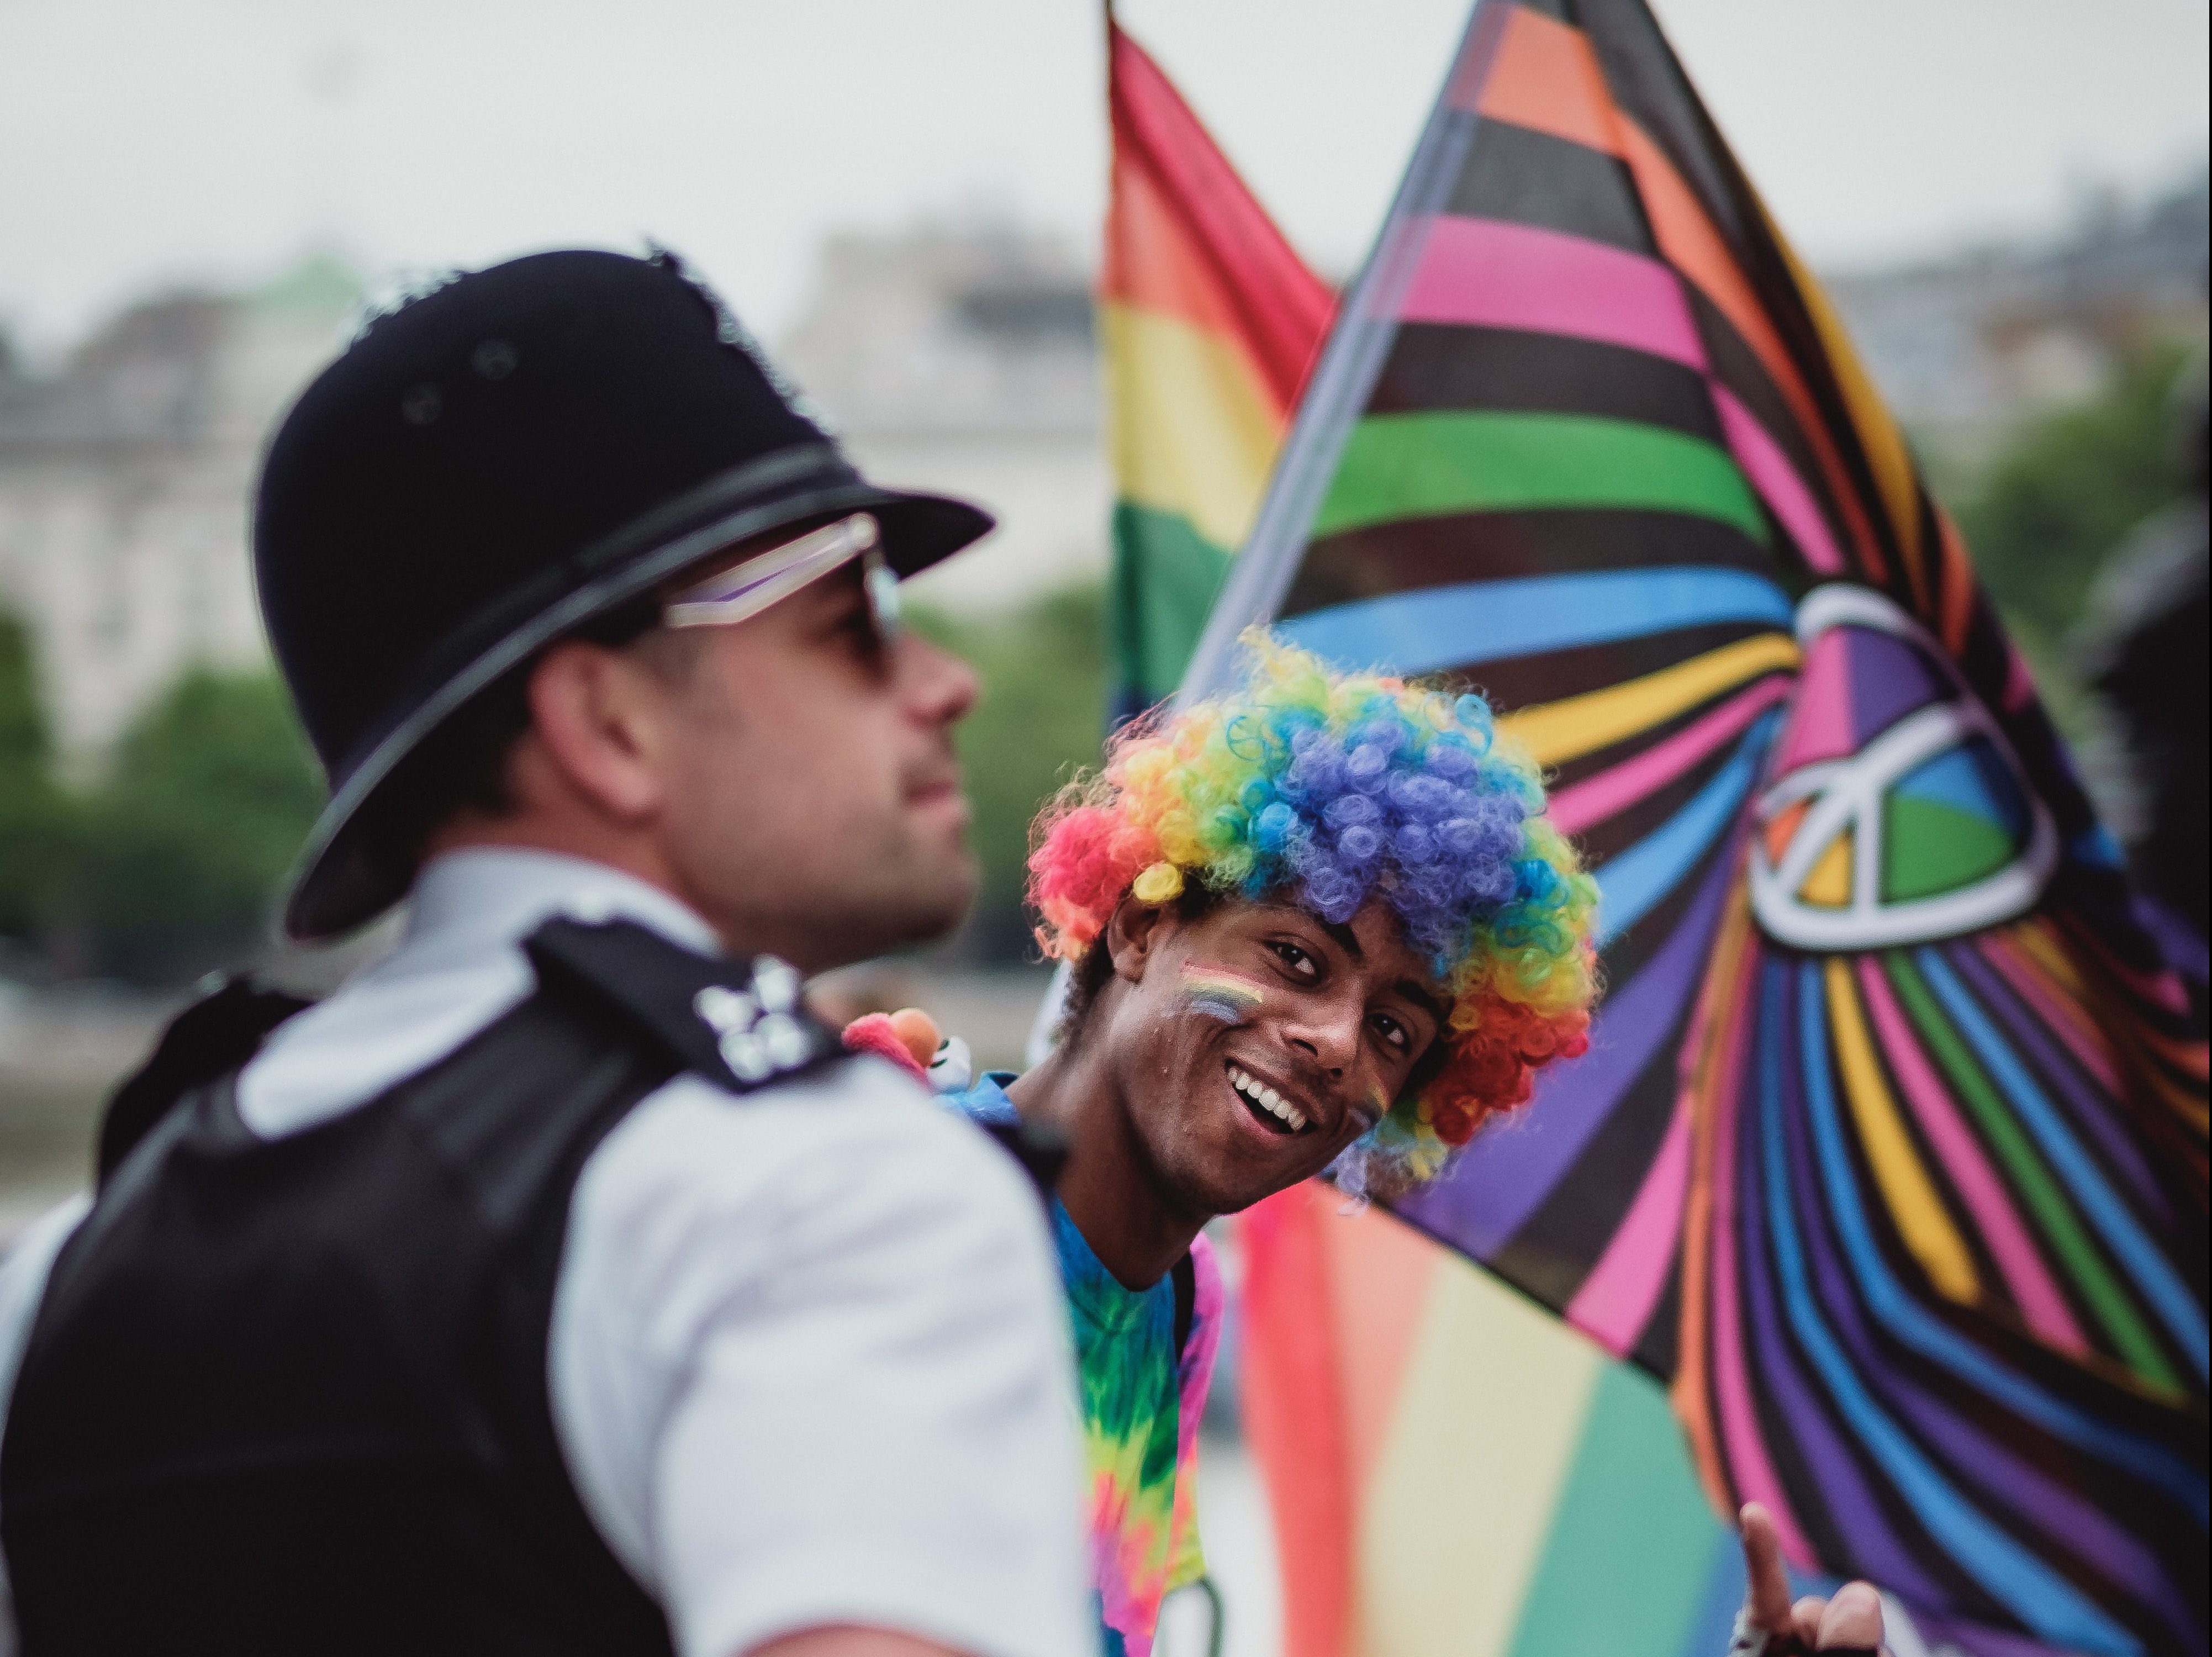 young man in a rainbow wig smiling at the camera, looking past a police officer in sunglasses